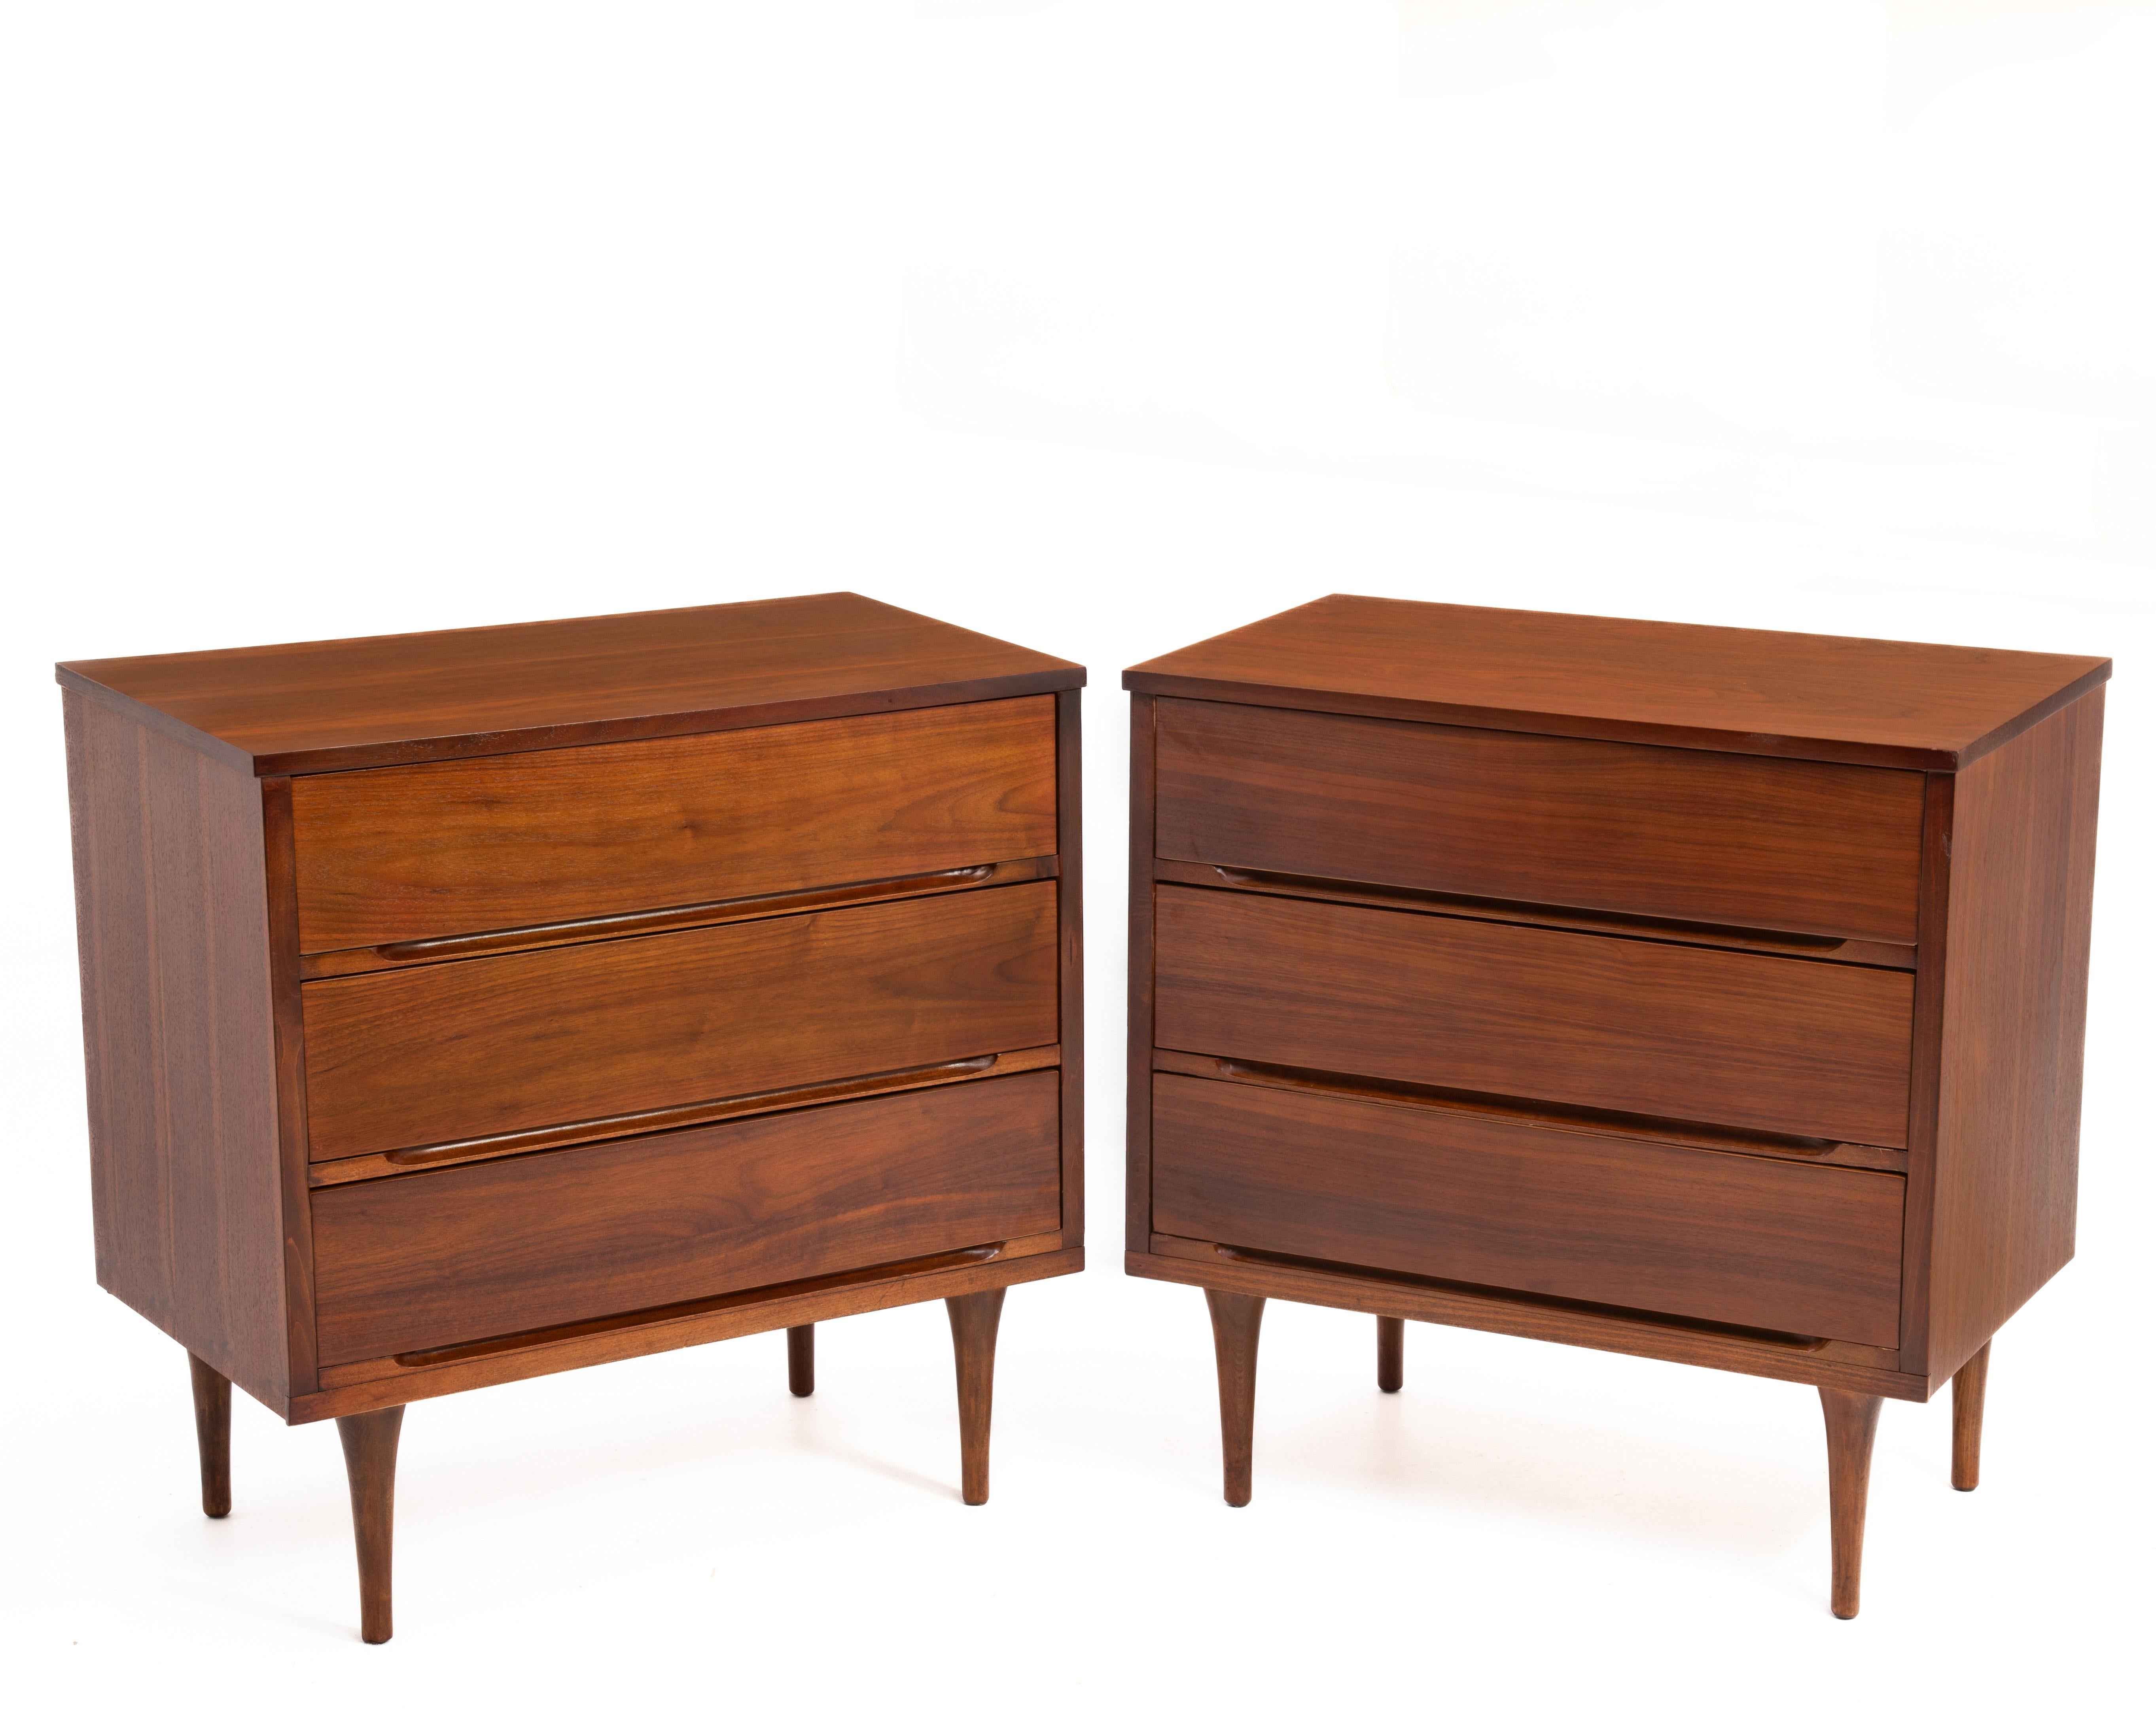 A professionally refinished and well kept pair of Mid Century American Modern walnut three drawer chests. The walnut is beautiful, well chosen and book matched. This chests have tapered legs and each have 3 drawers. The drawers have hidden pulls